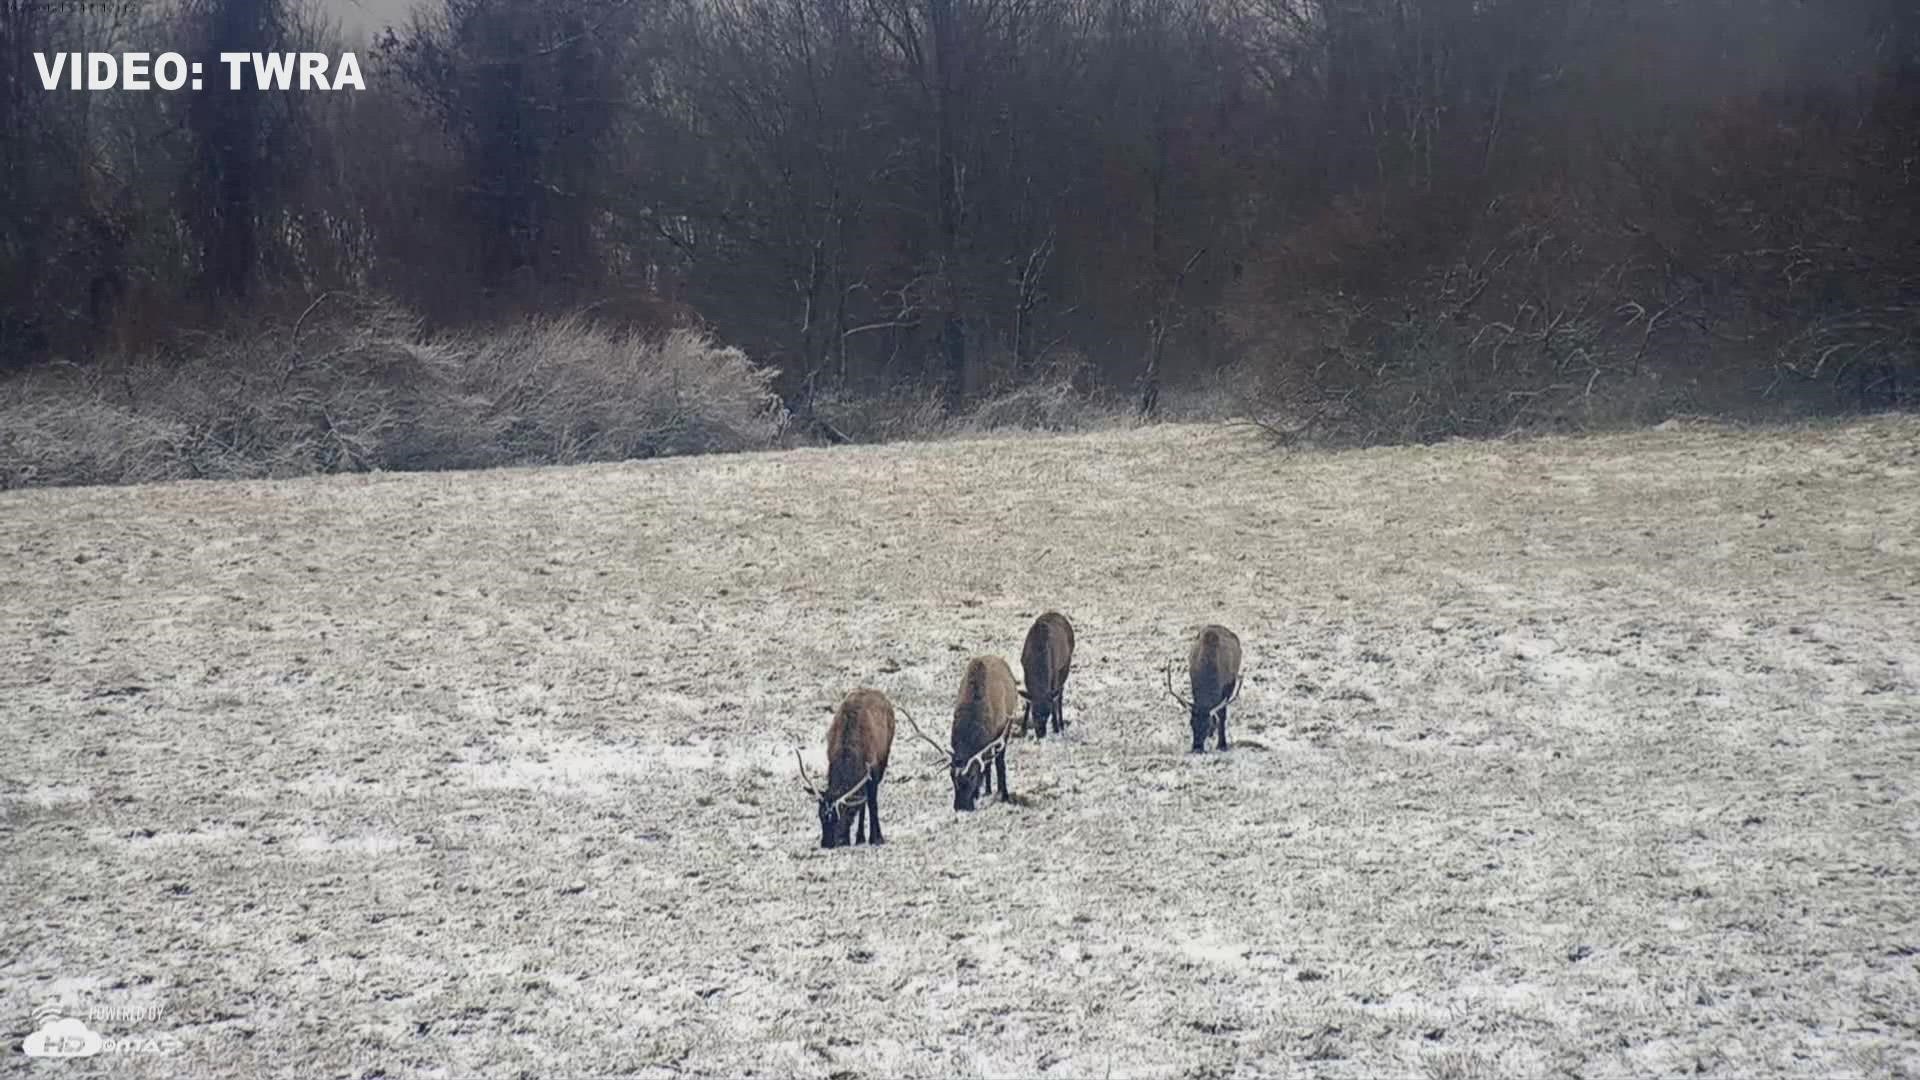 The TWRA's cameras caught a group of elk enjoying a tasty treat of some snowy grass on Friday.